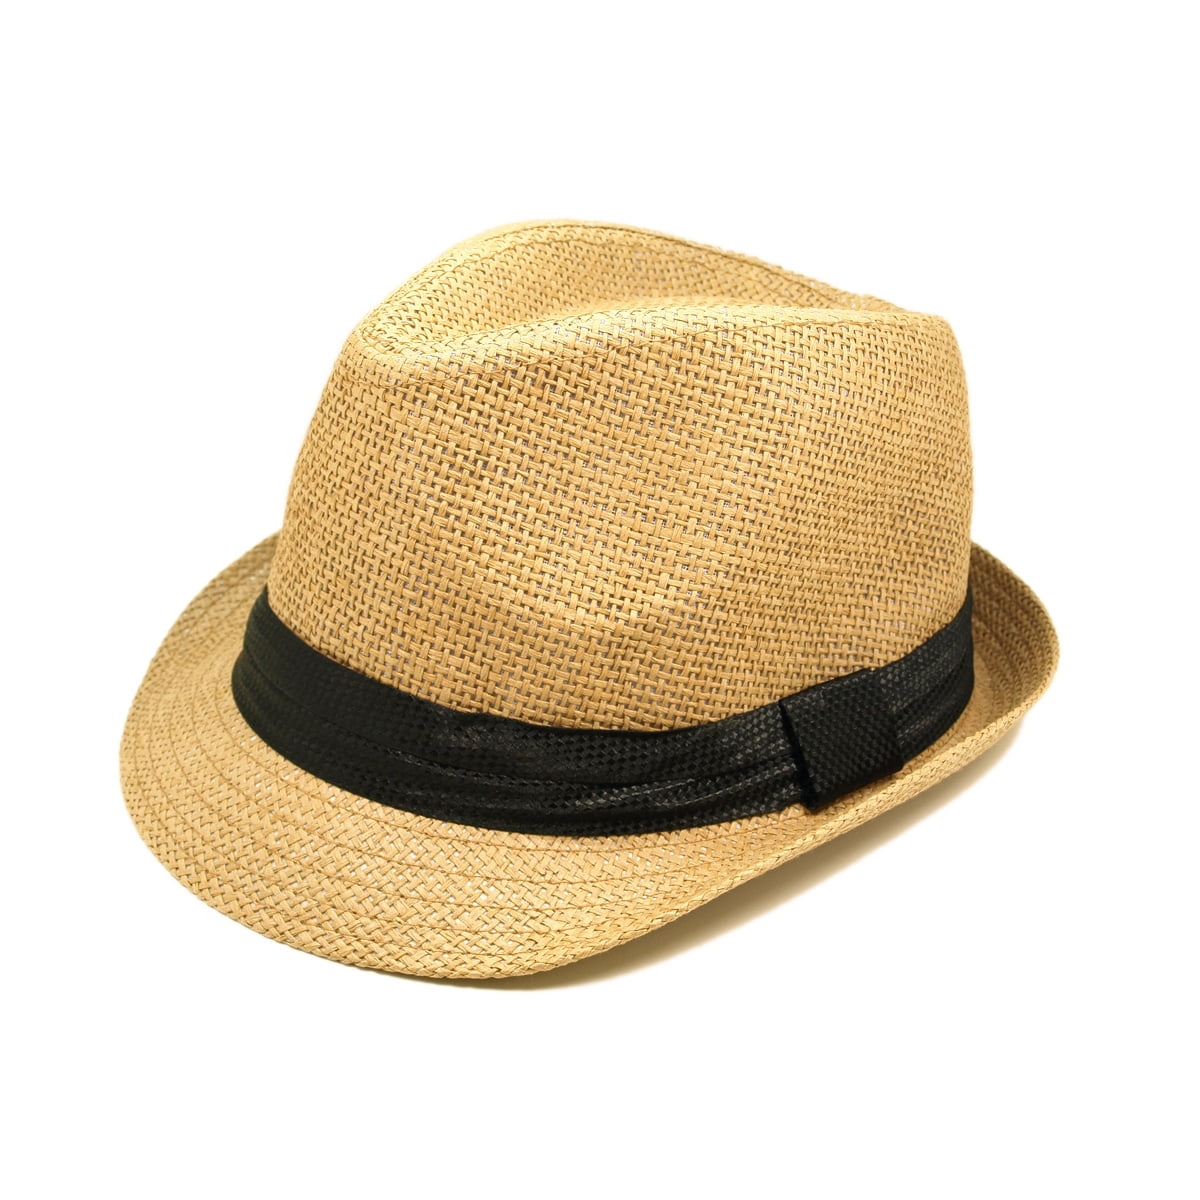 TrendsBlue Classic Tan Fedora Straw Hat Band Available 